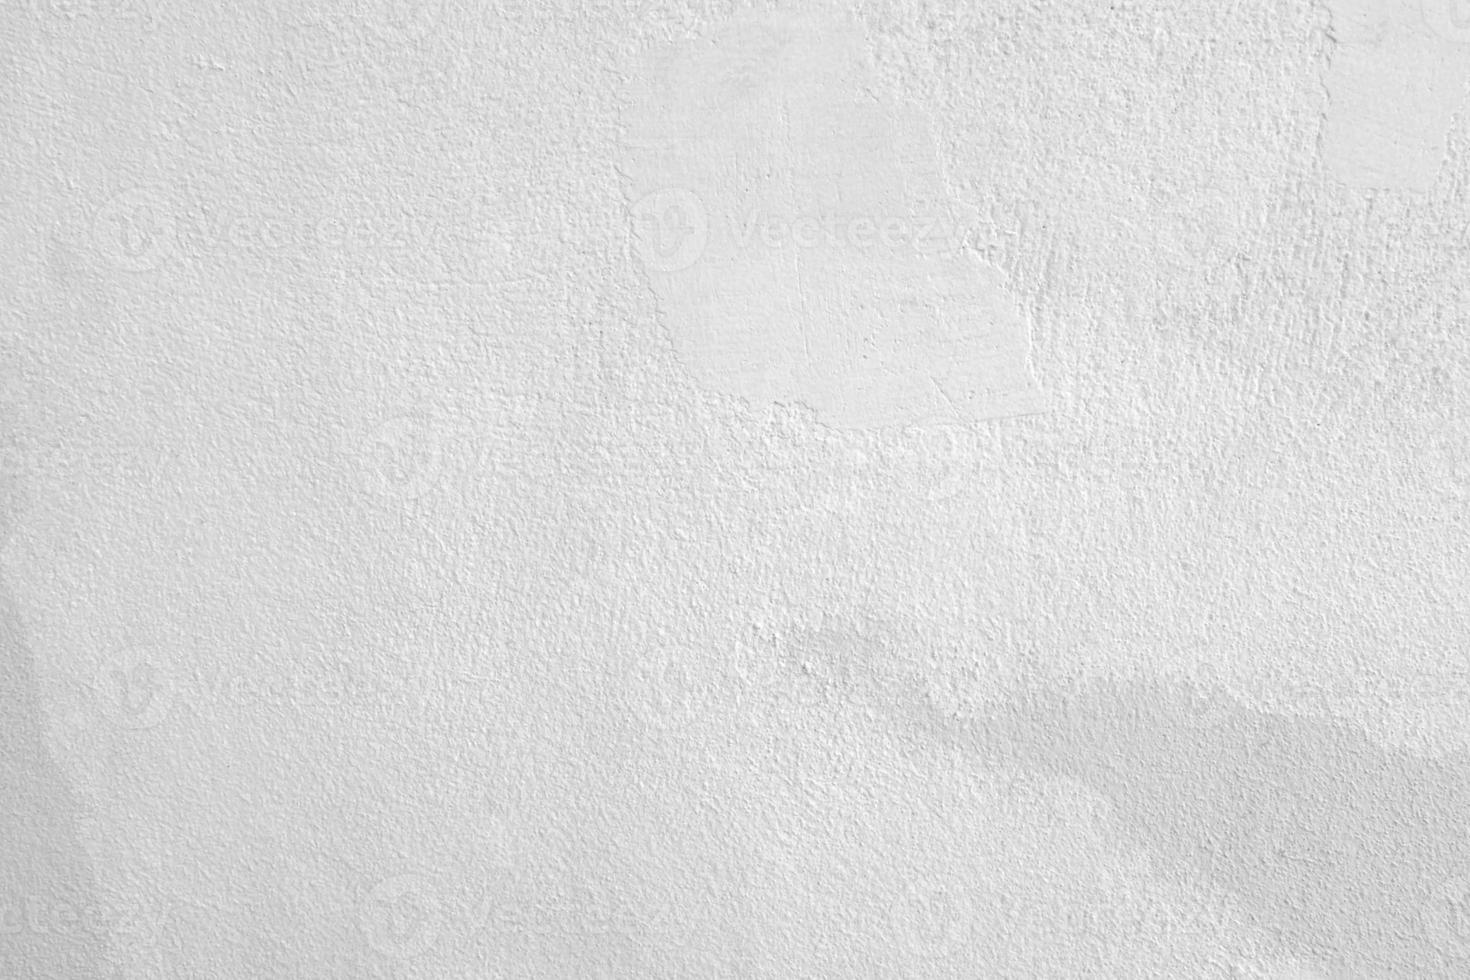 White cement background with texture and roughness photo